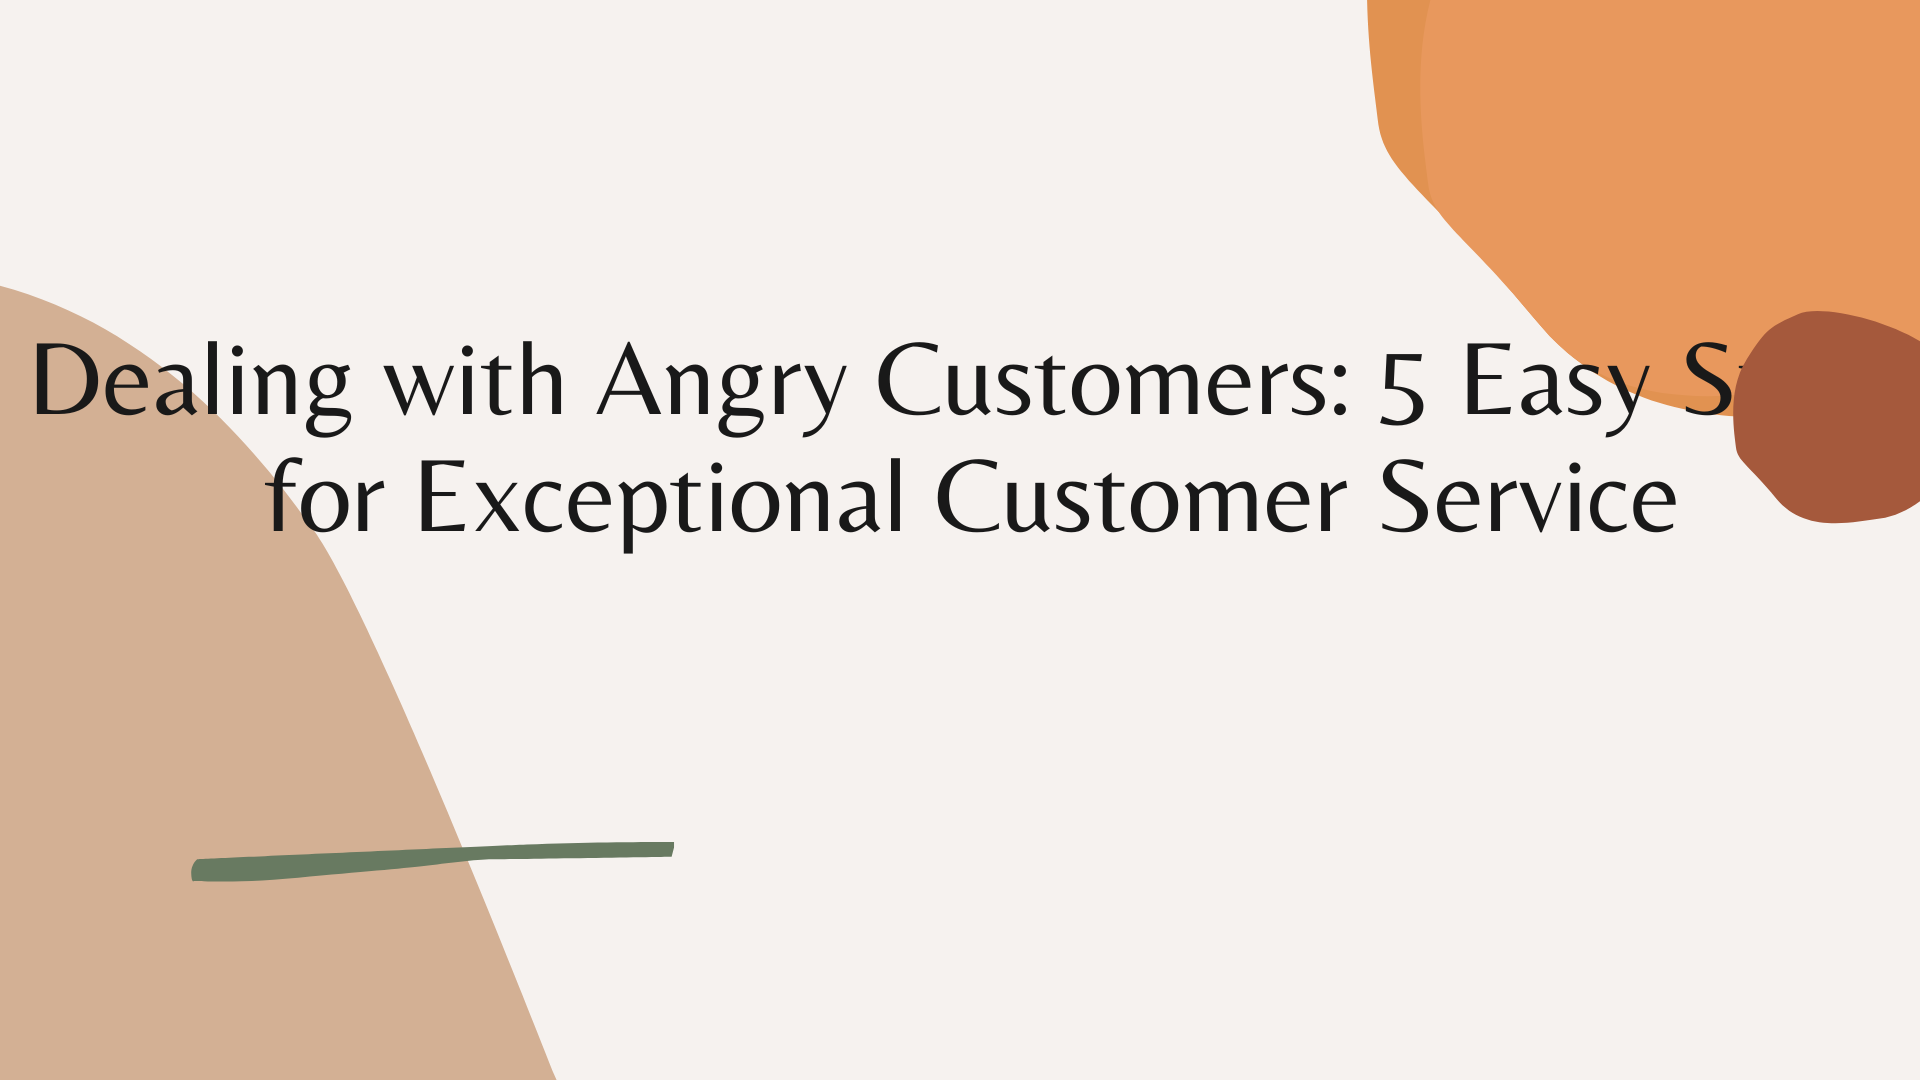 Dealing with Angry Customers: 5 Easy Steps for Exceptional Customer Service